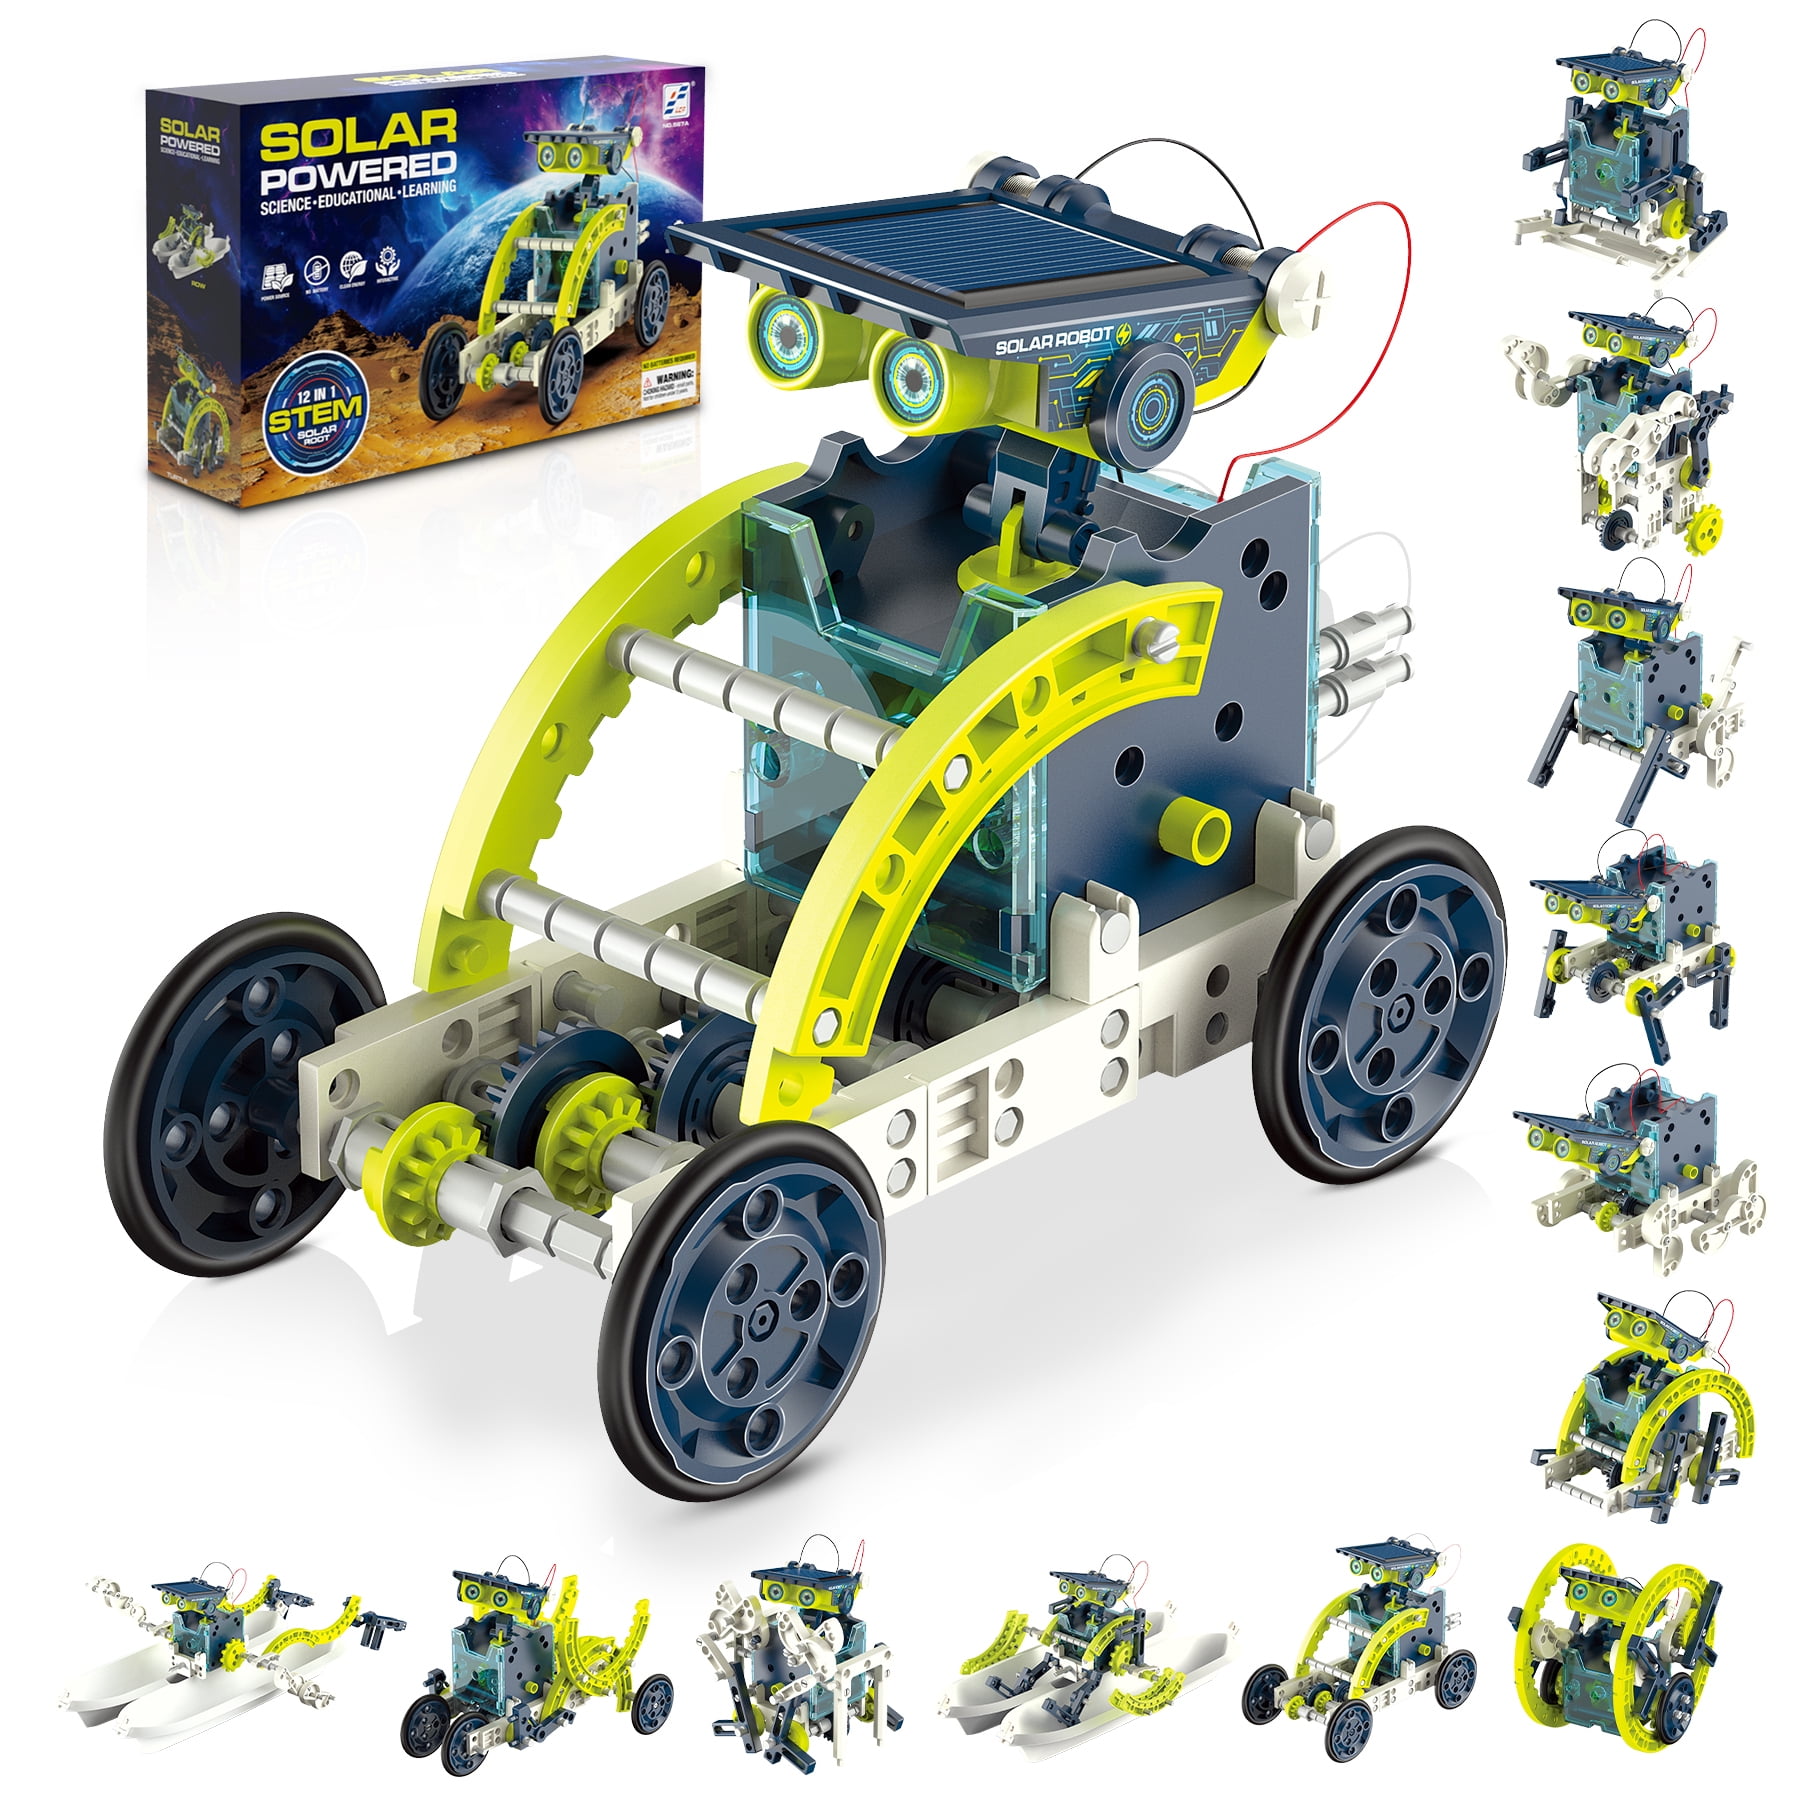 Tomons STEM Toys 6-in-1 Solar Robot Kit Learning Science Building Toys  Educational Science Kits Powered by Solar Robot for Kids 8 9 10-12 Year Old  Boys Girls Gifts 